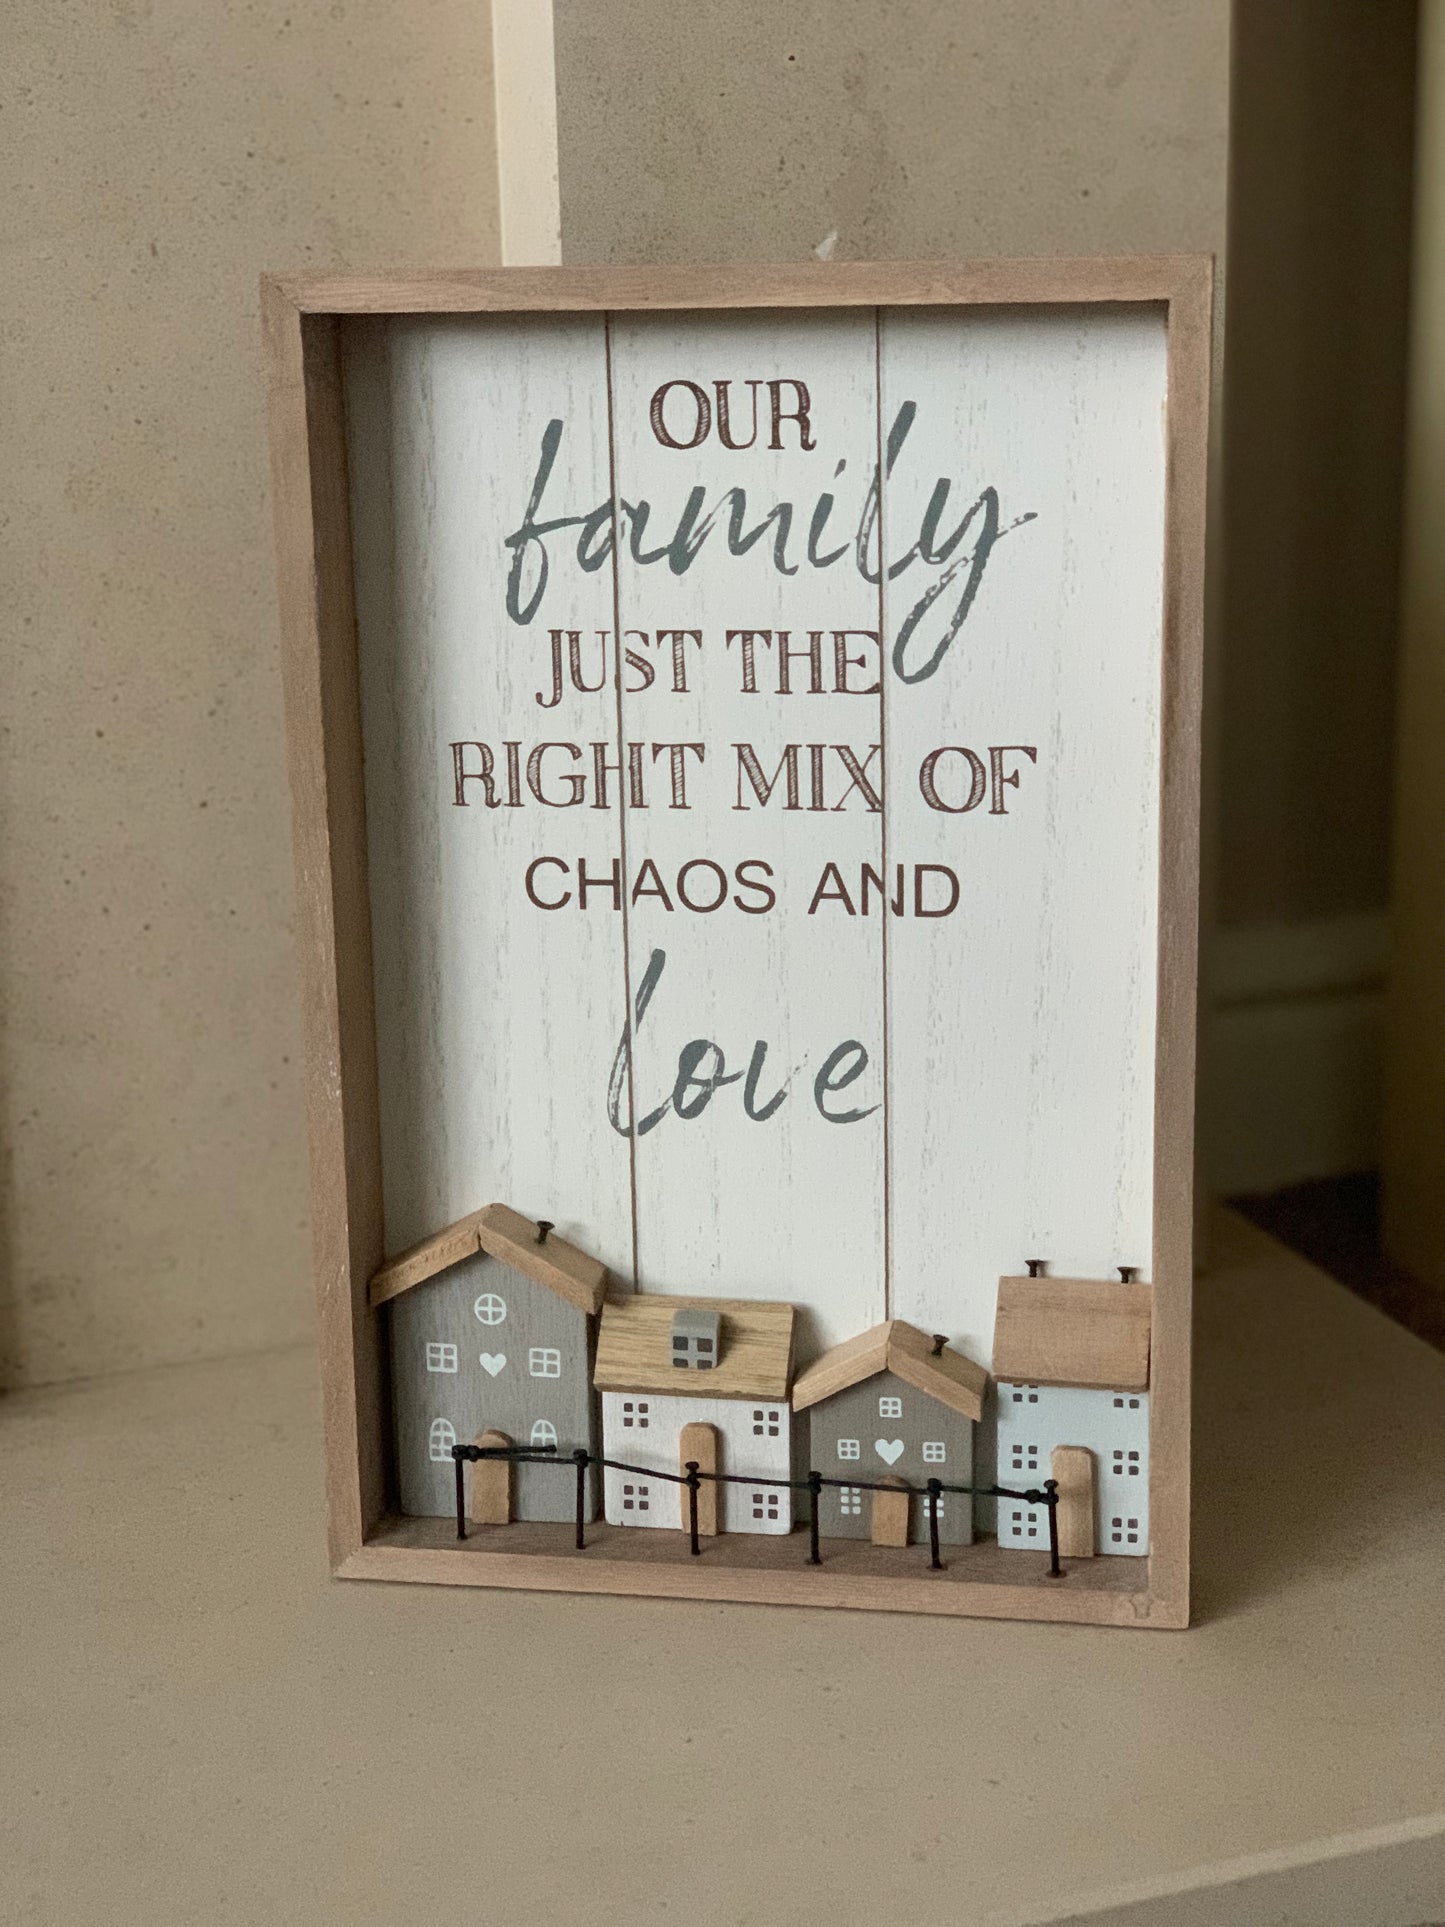 Family is a mix of chaos & love sign